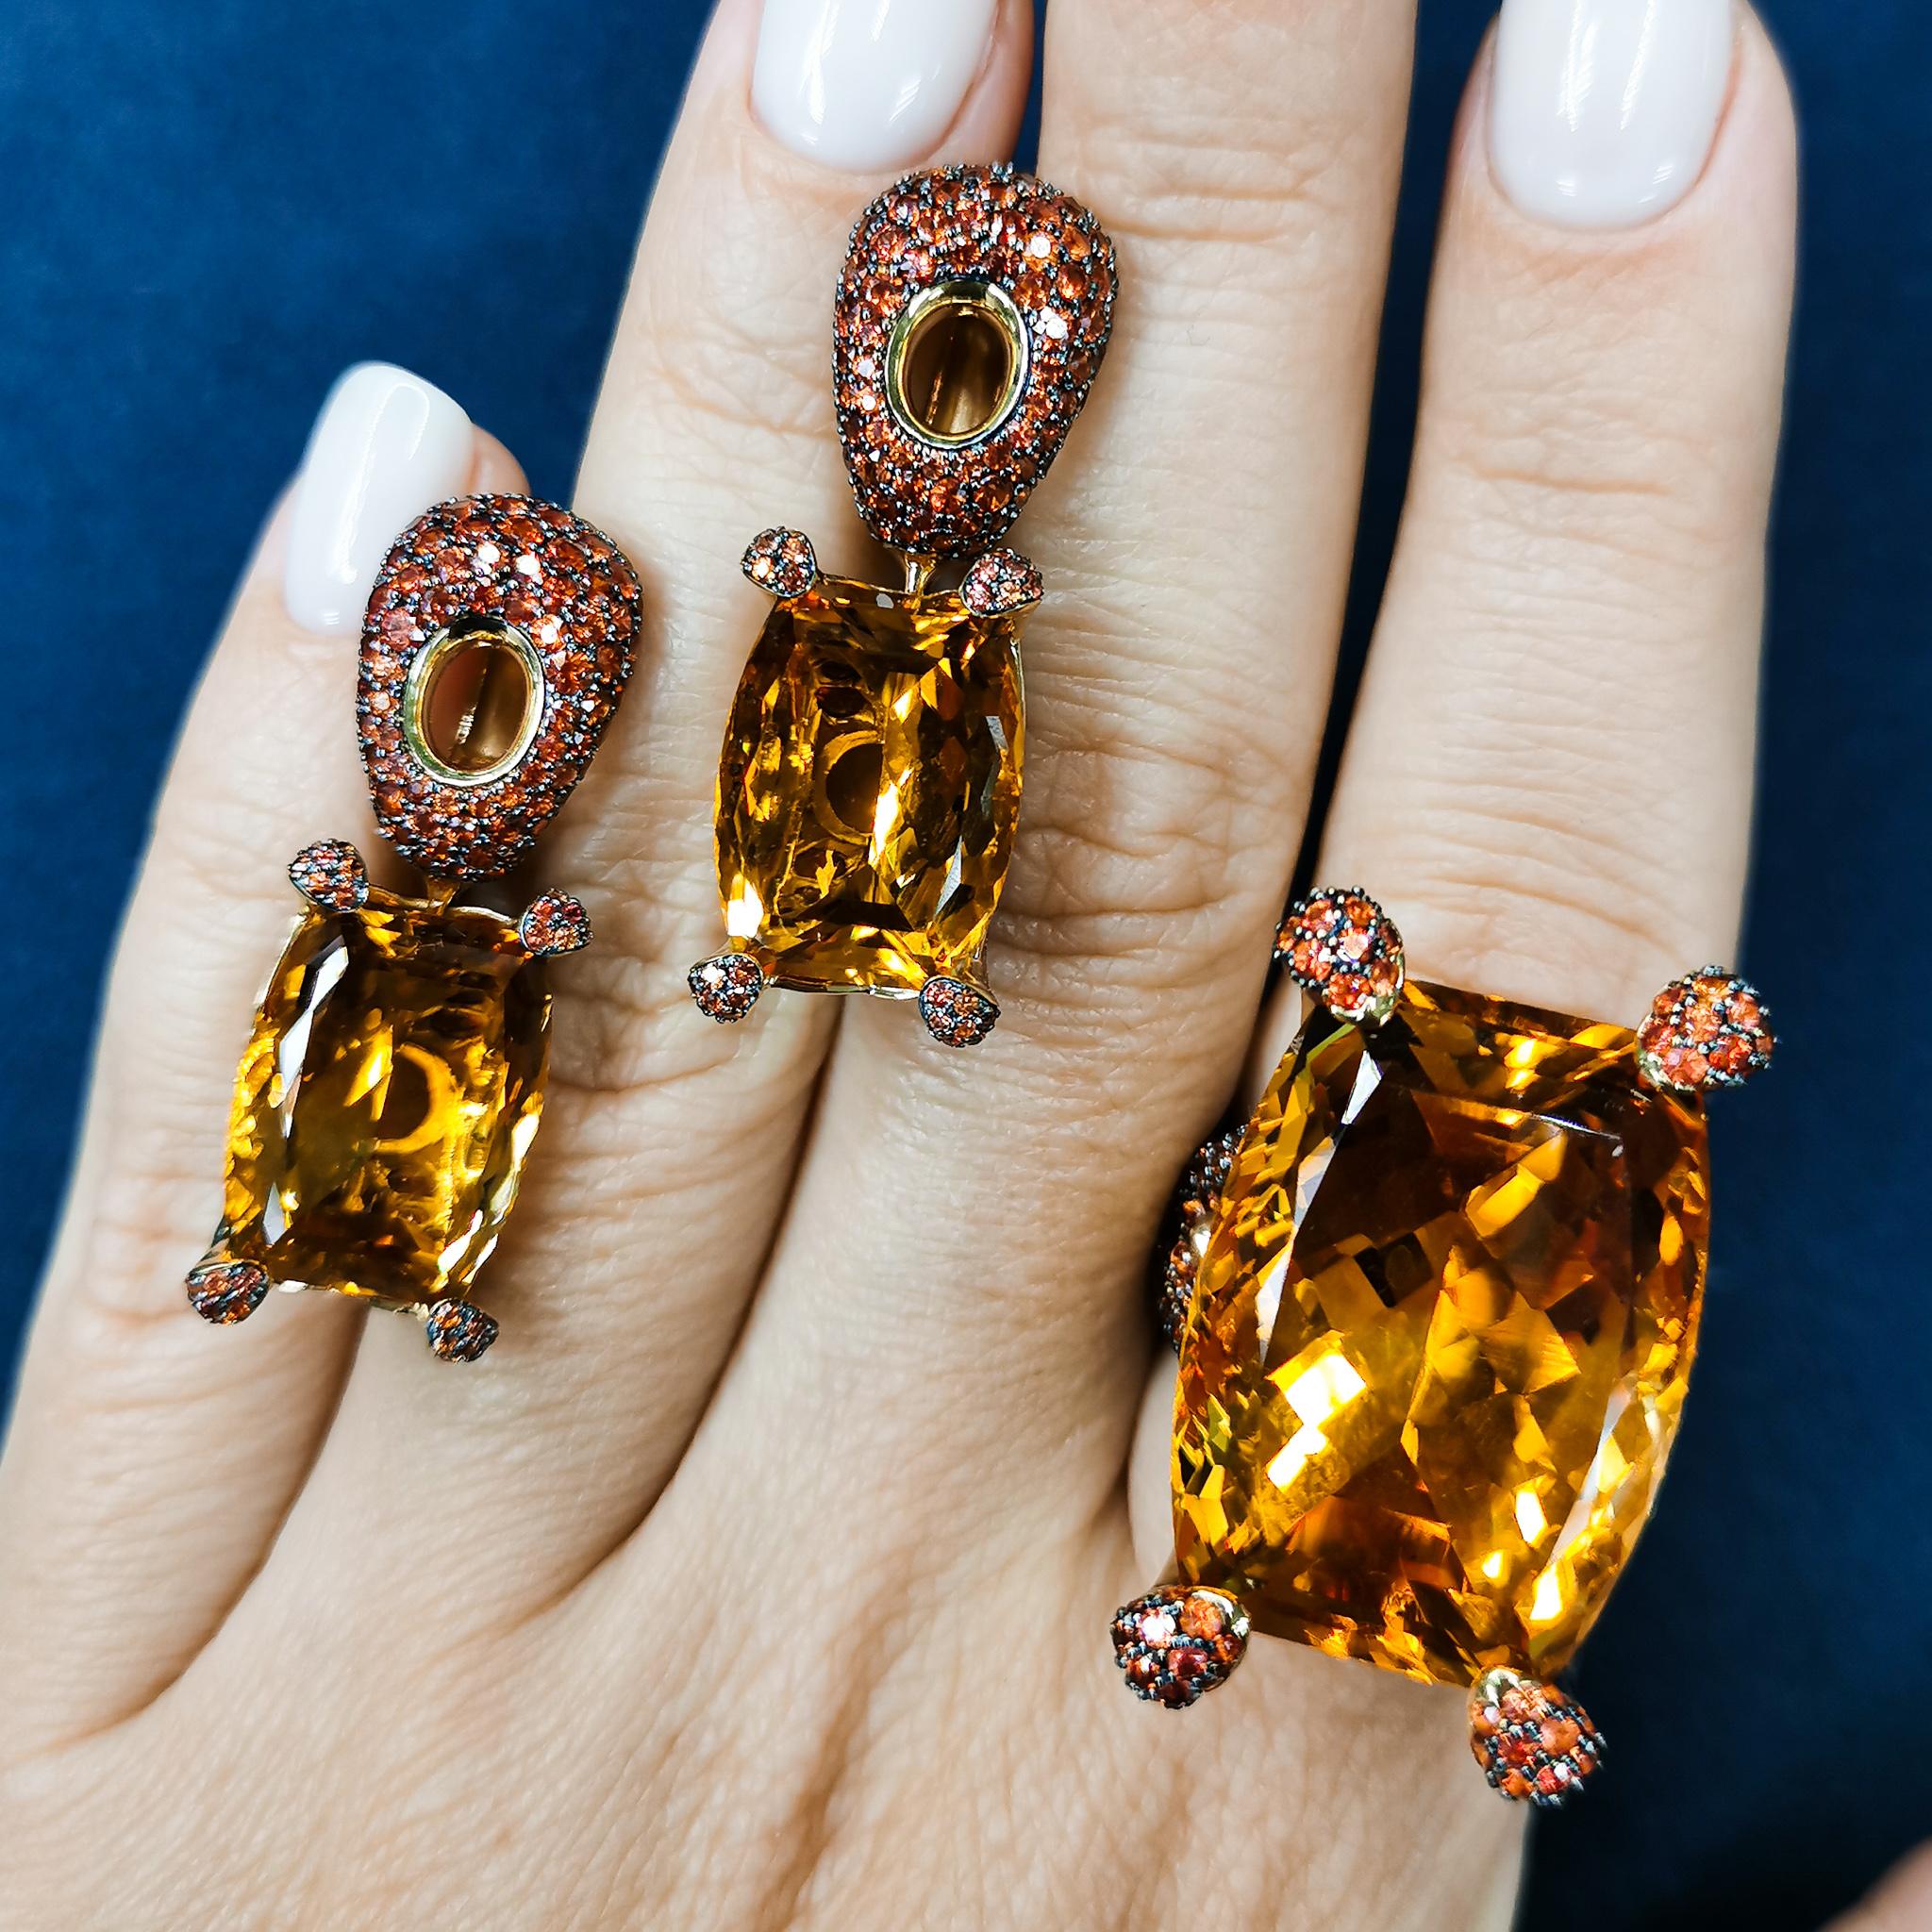 Citrine Orange Sapphires 18 Karat Yellow Gold Suite
Highlighting a Citrine and Orange Sapphires are mounted on an 18 Karat Gold lined with black rhodium. It displays a riveting interplay of contrast surfaces with the finest gemstones. Delicate color